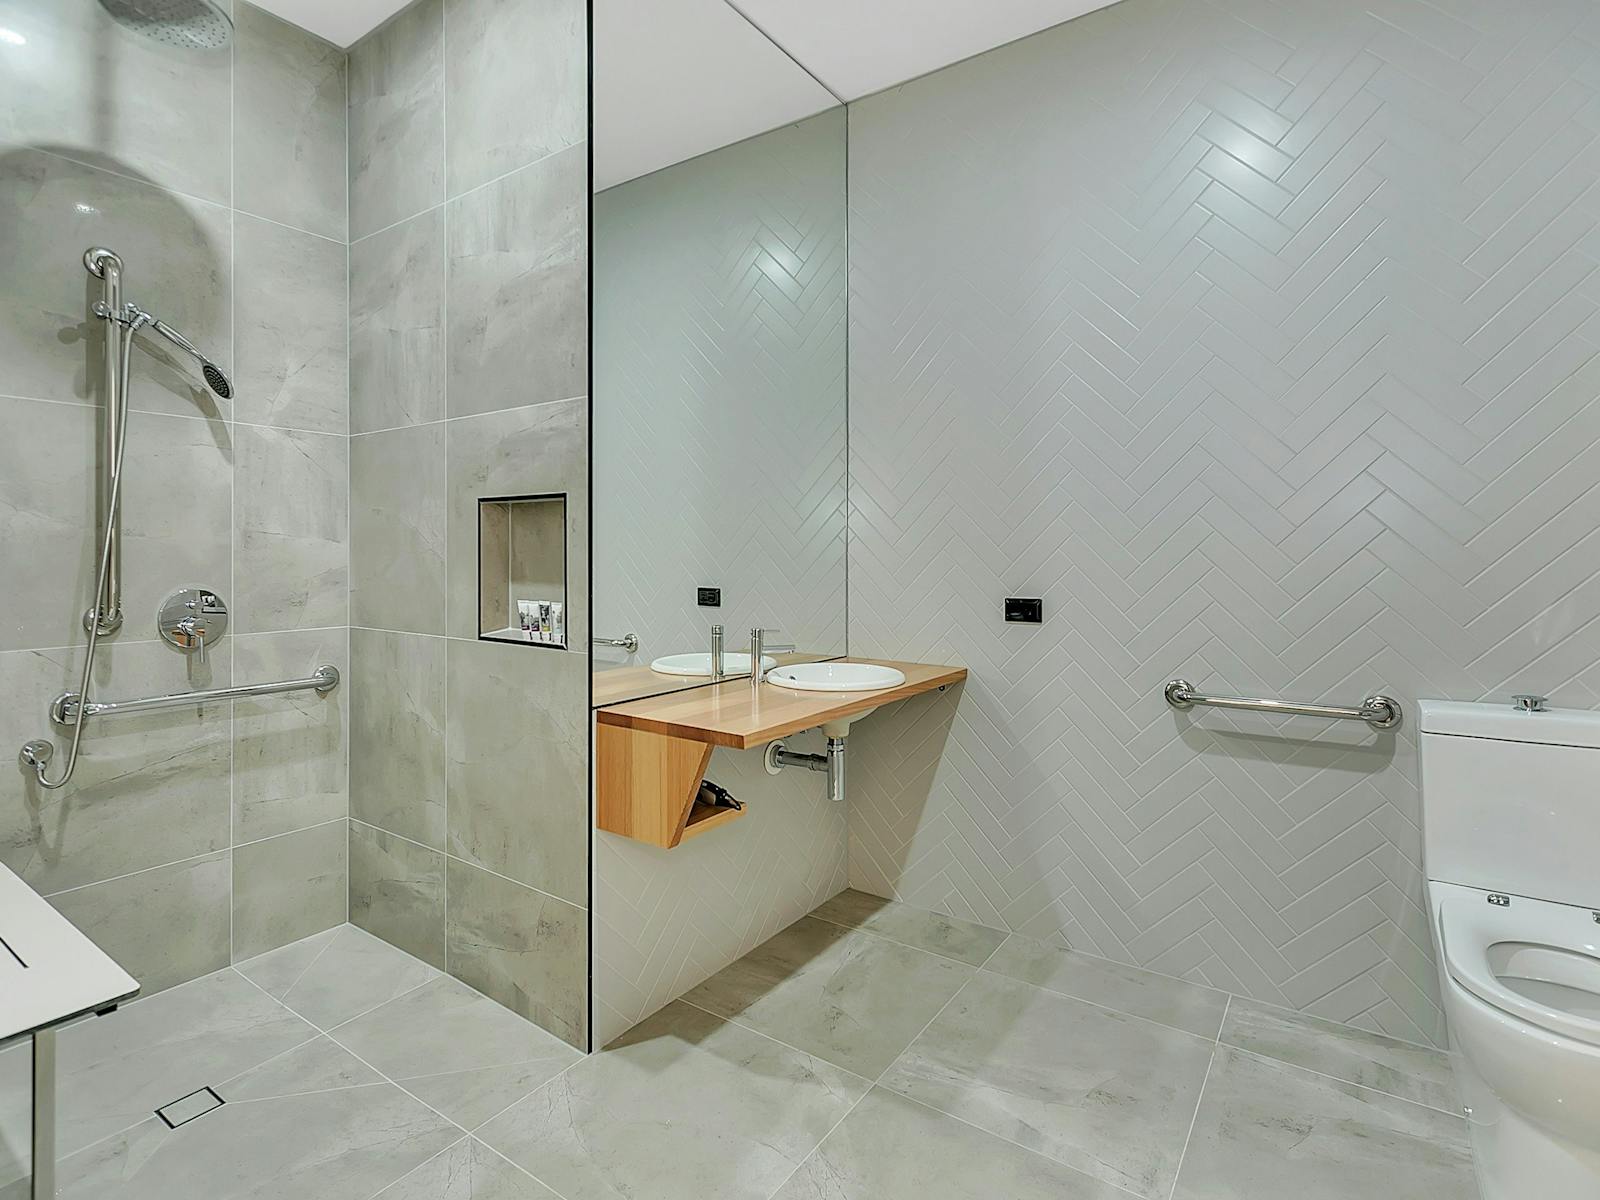 Accessible bathroom, with large shower with no door or curtain, accessible low basin and toilet.